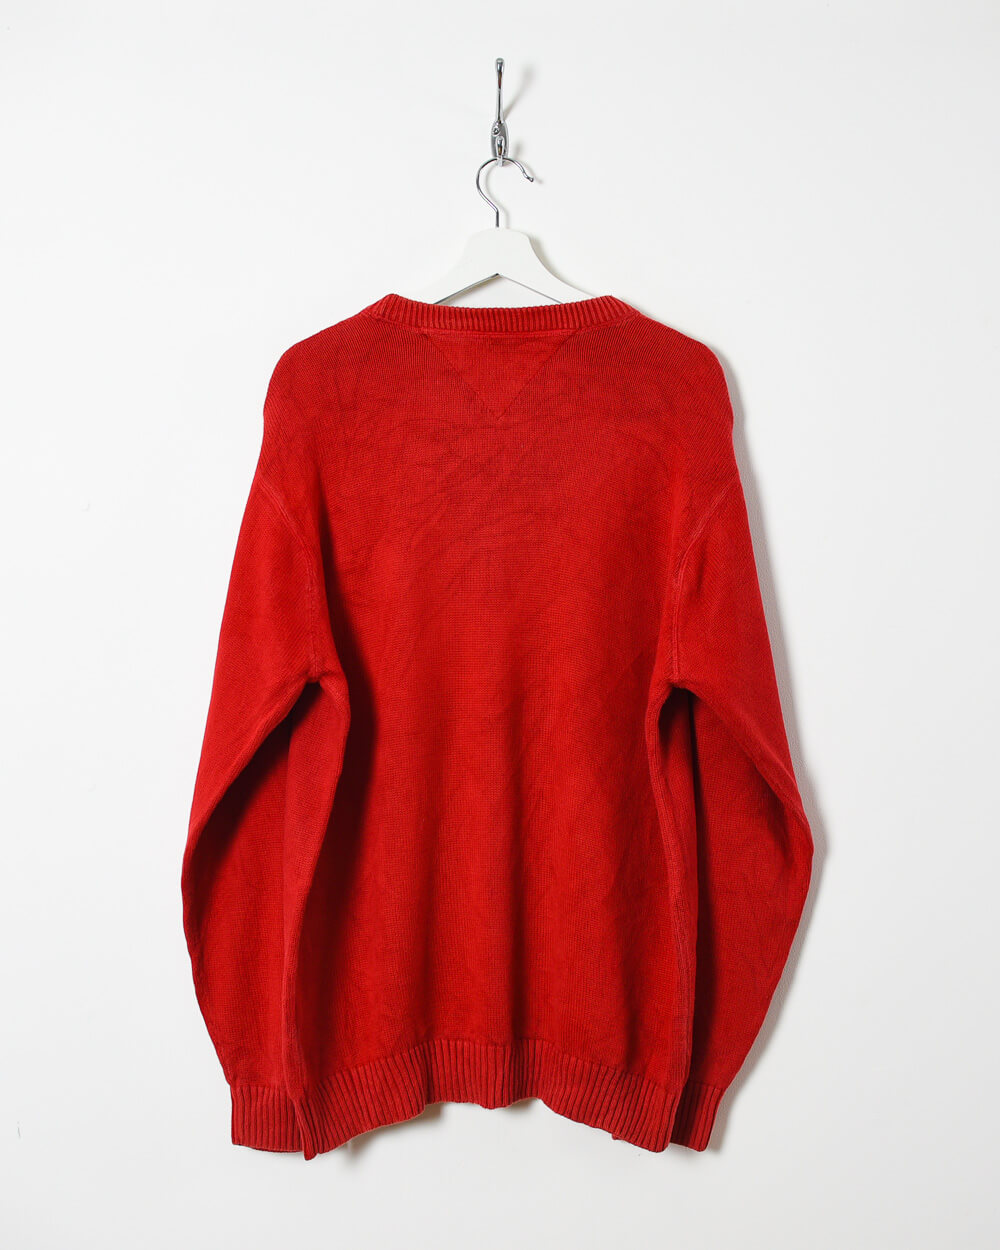 Red Tommy Hilfiger Knitted Sweatshirt - Large